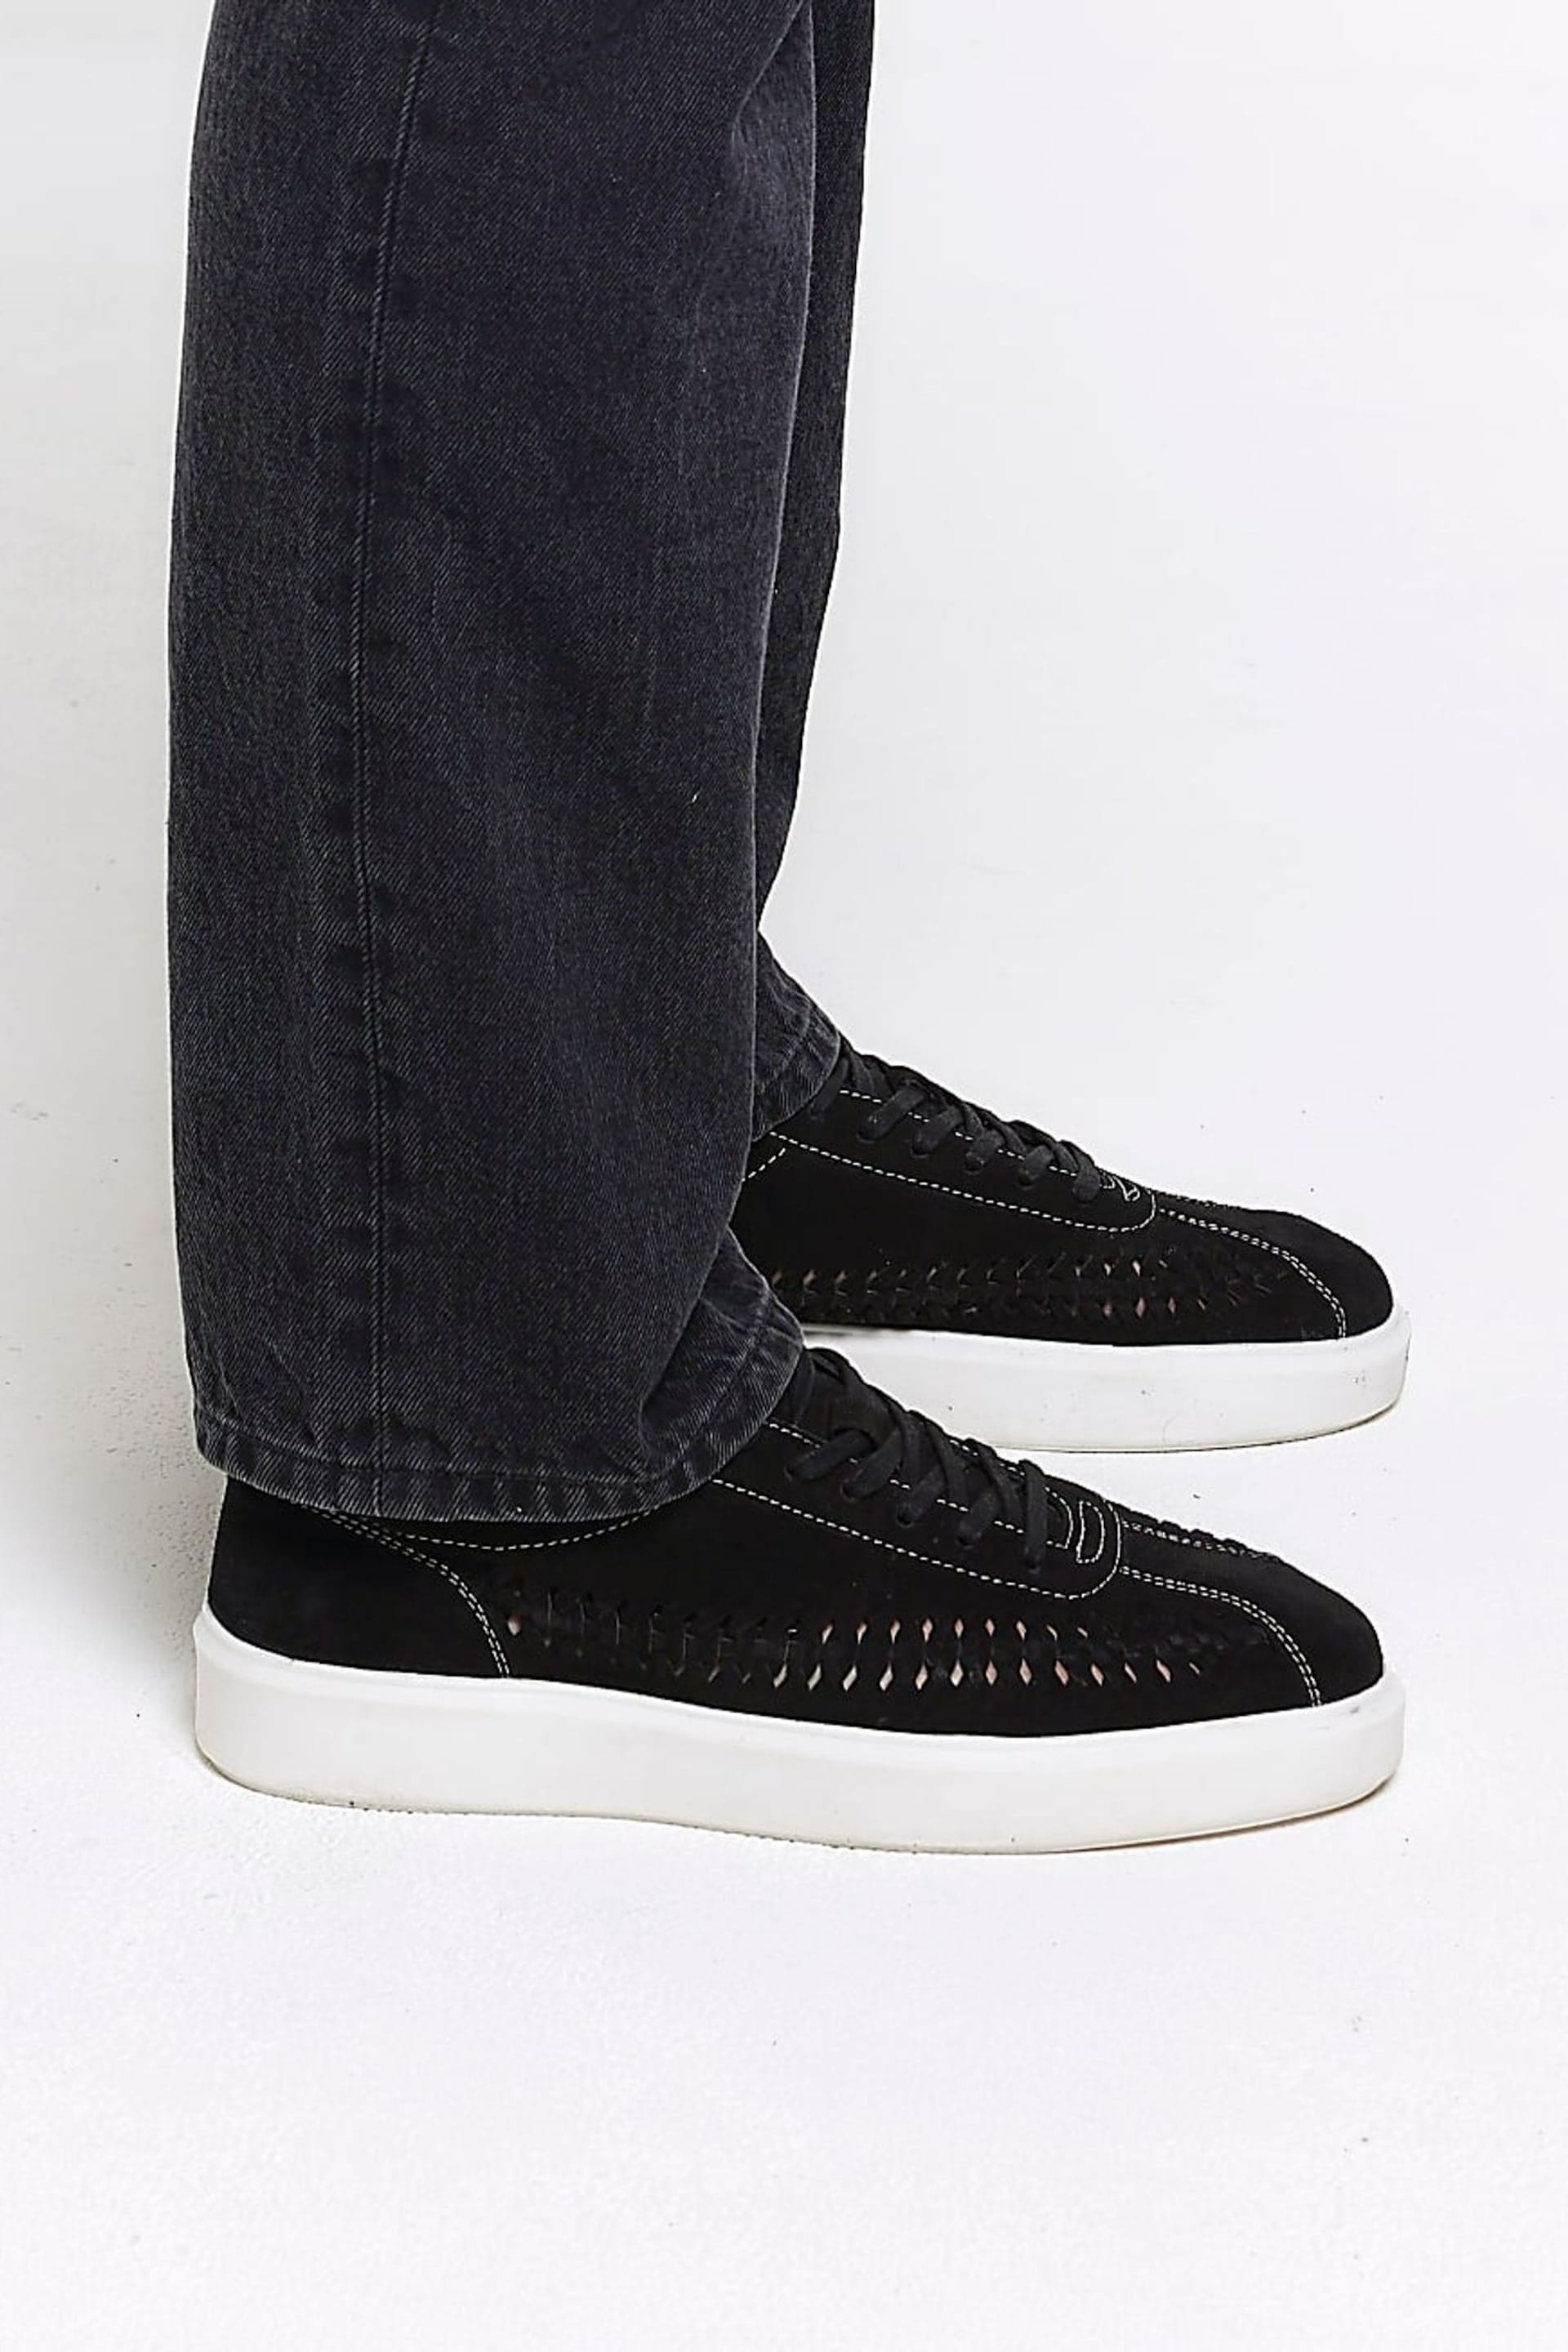 River Island Black Leather Leather Weave Detail Cupsole Trainers - Image 6 of 6